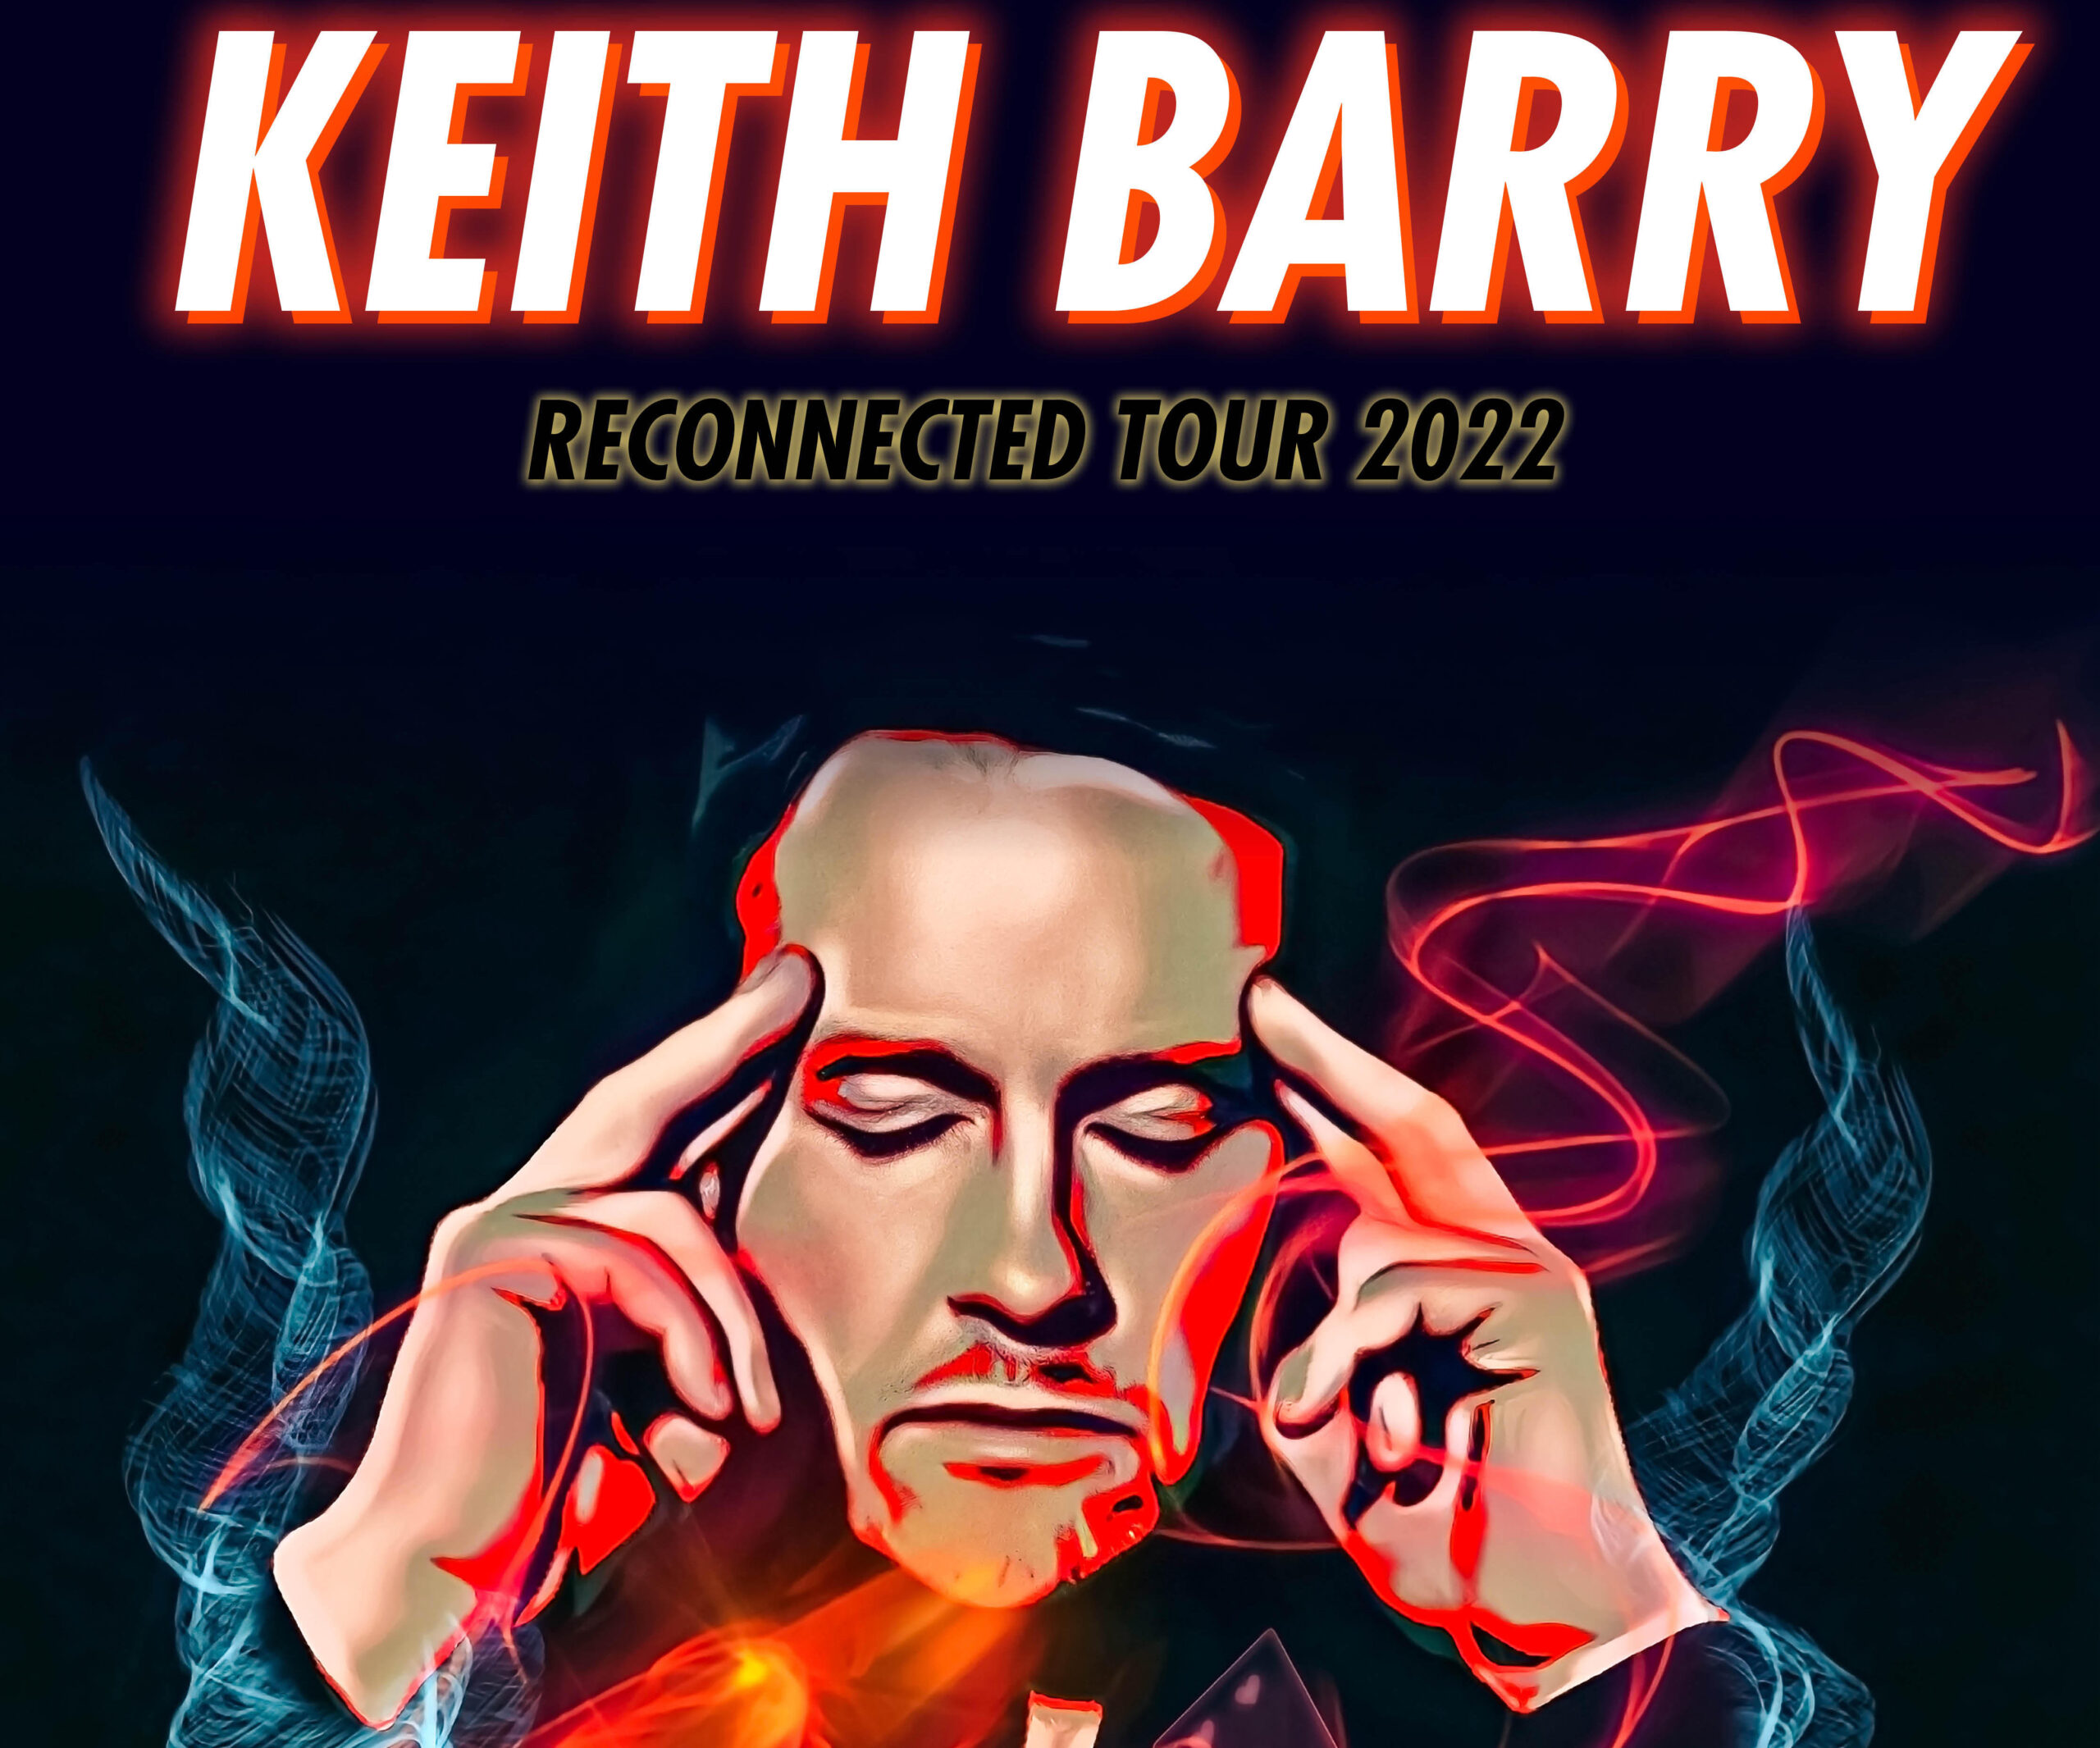 Keith Barry reconnected has written, produced and performed many of his own stage shows in the last fifteen years and has sold out venues in the US, Australia, Canada, Spain, South Africa, the UK and of course his native Ireland